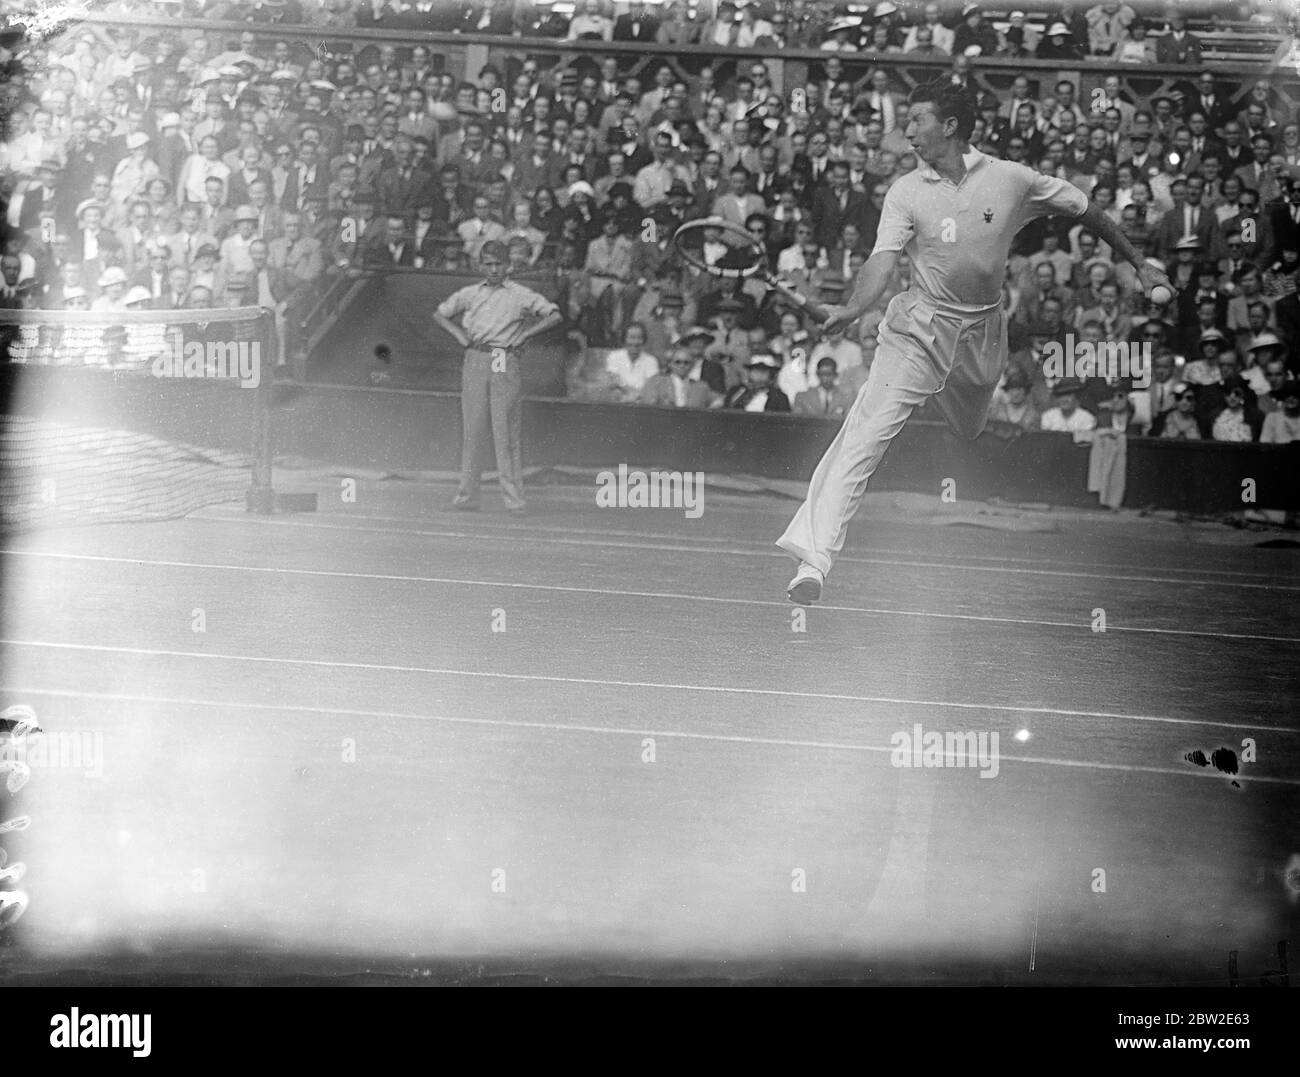 Donald Budge in play. Hare beat Budge to become Wimbledon champion winning 13-15 in their singles match in the Davis cup challenge round at Wimbledon. 24 July 1937 Stock Photo